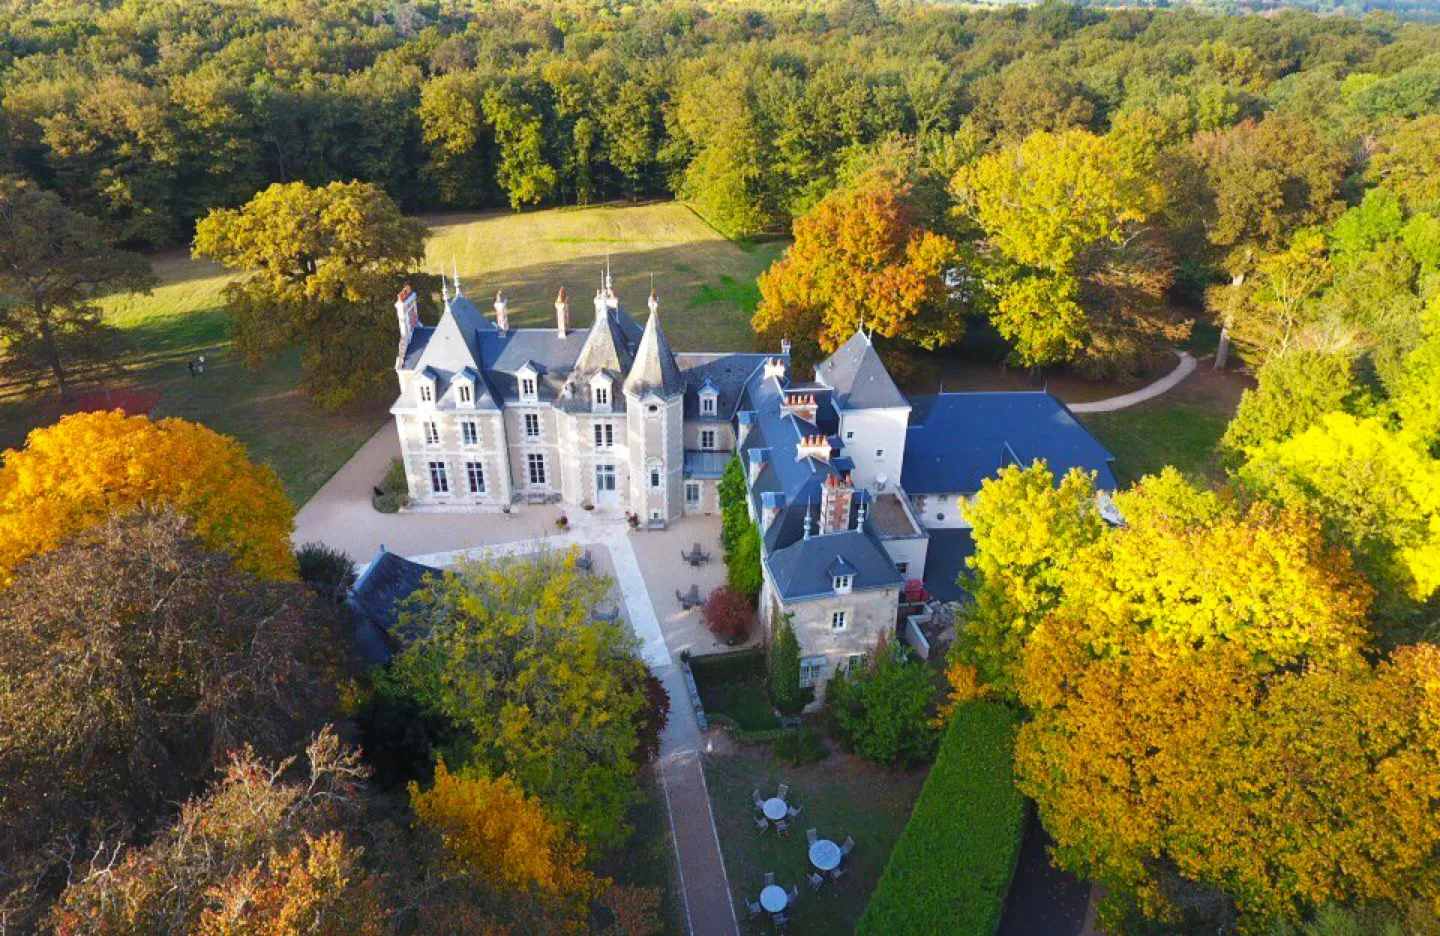 Stay in five-star chateaus in the Loire Valley on luxury driving tour through France